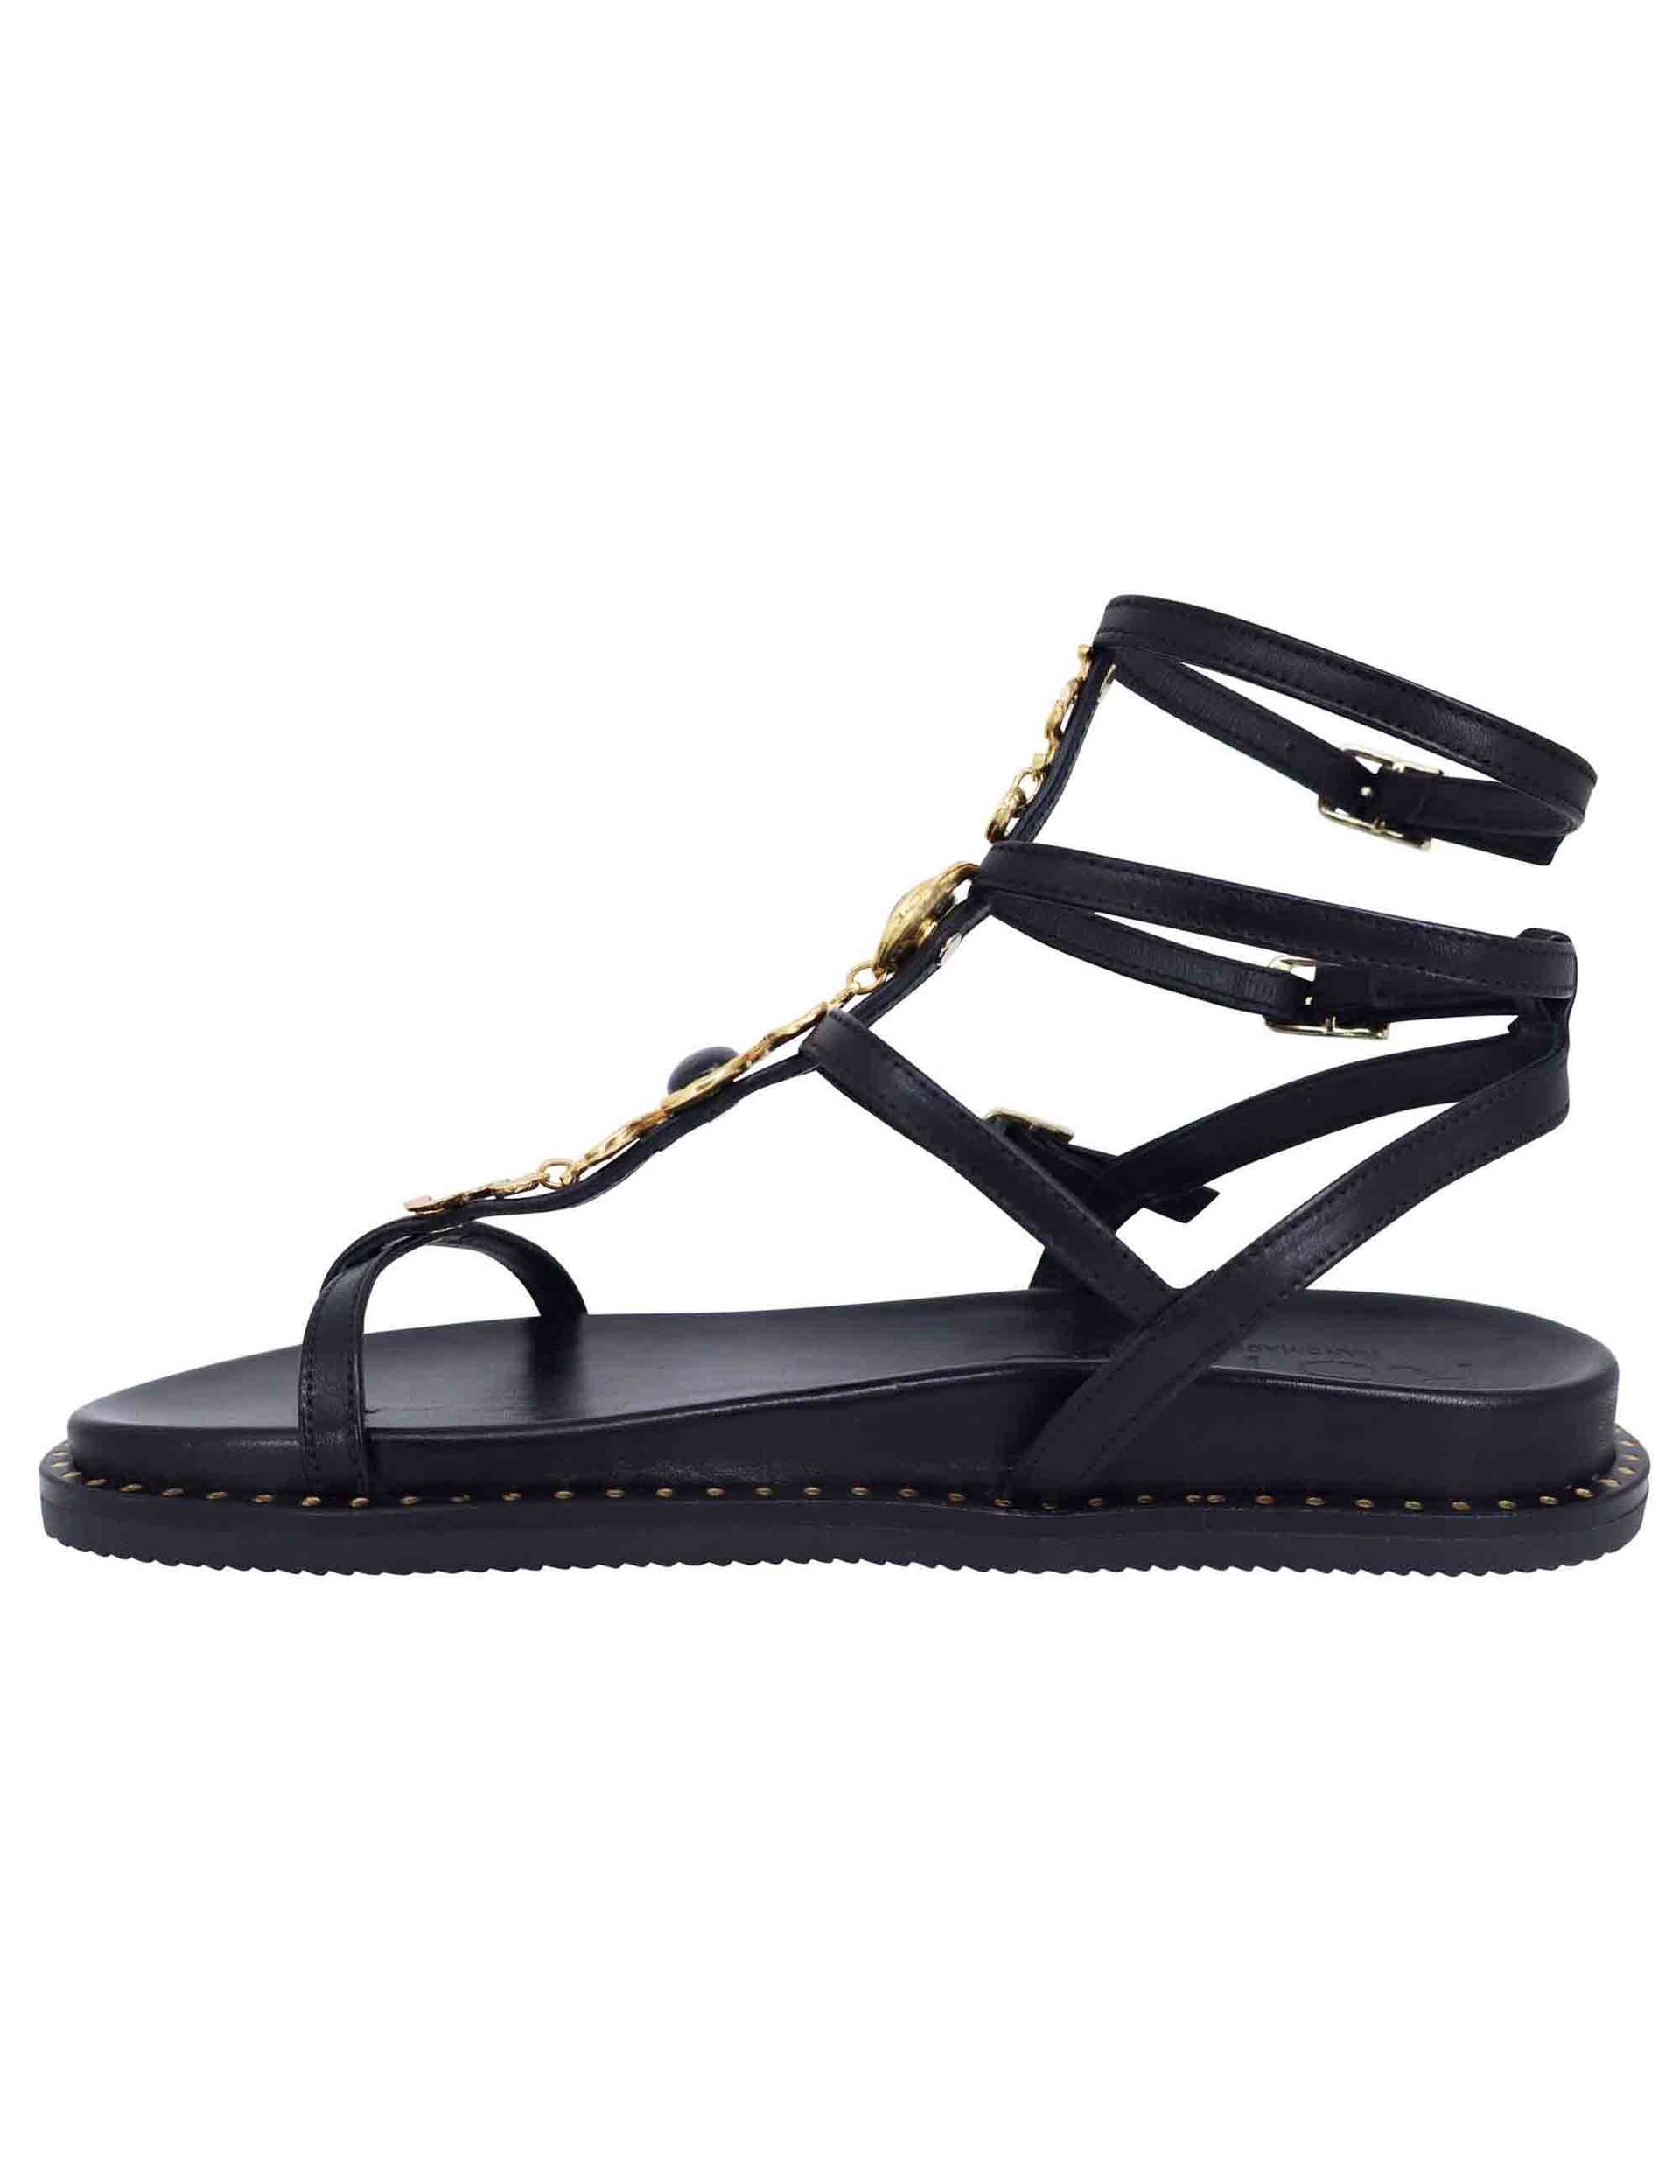 Women's flat flip-flop sandals in black leather with studs and ankle straps